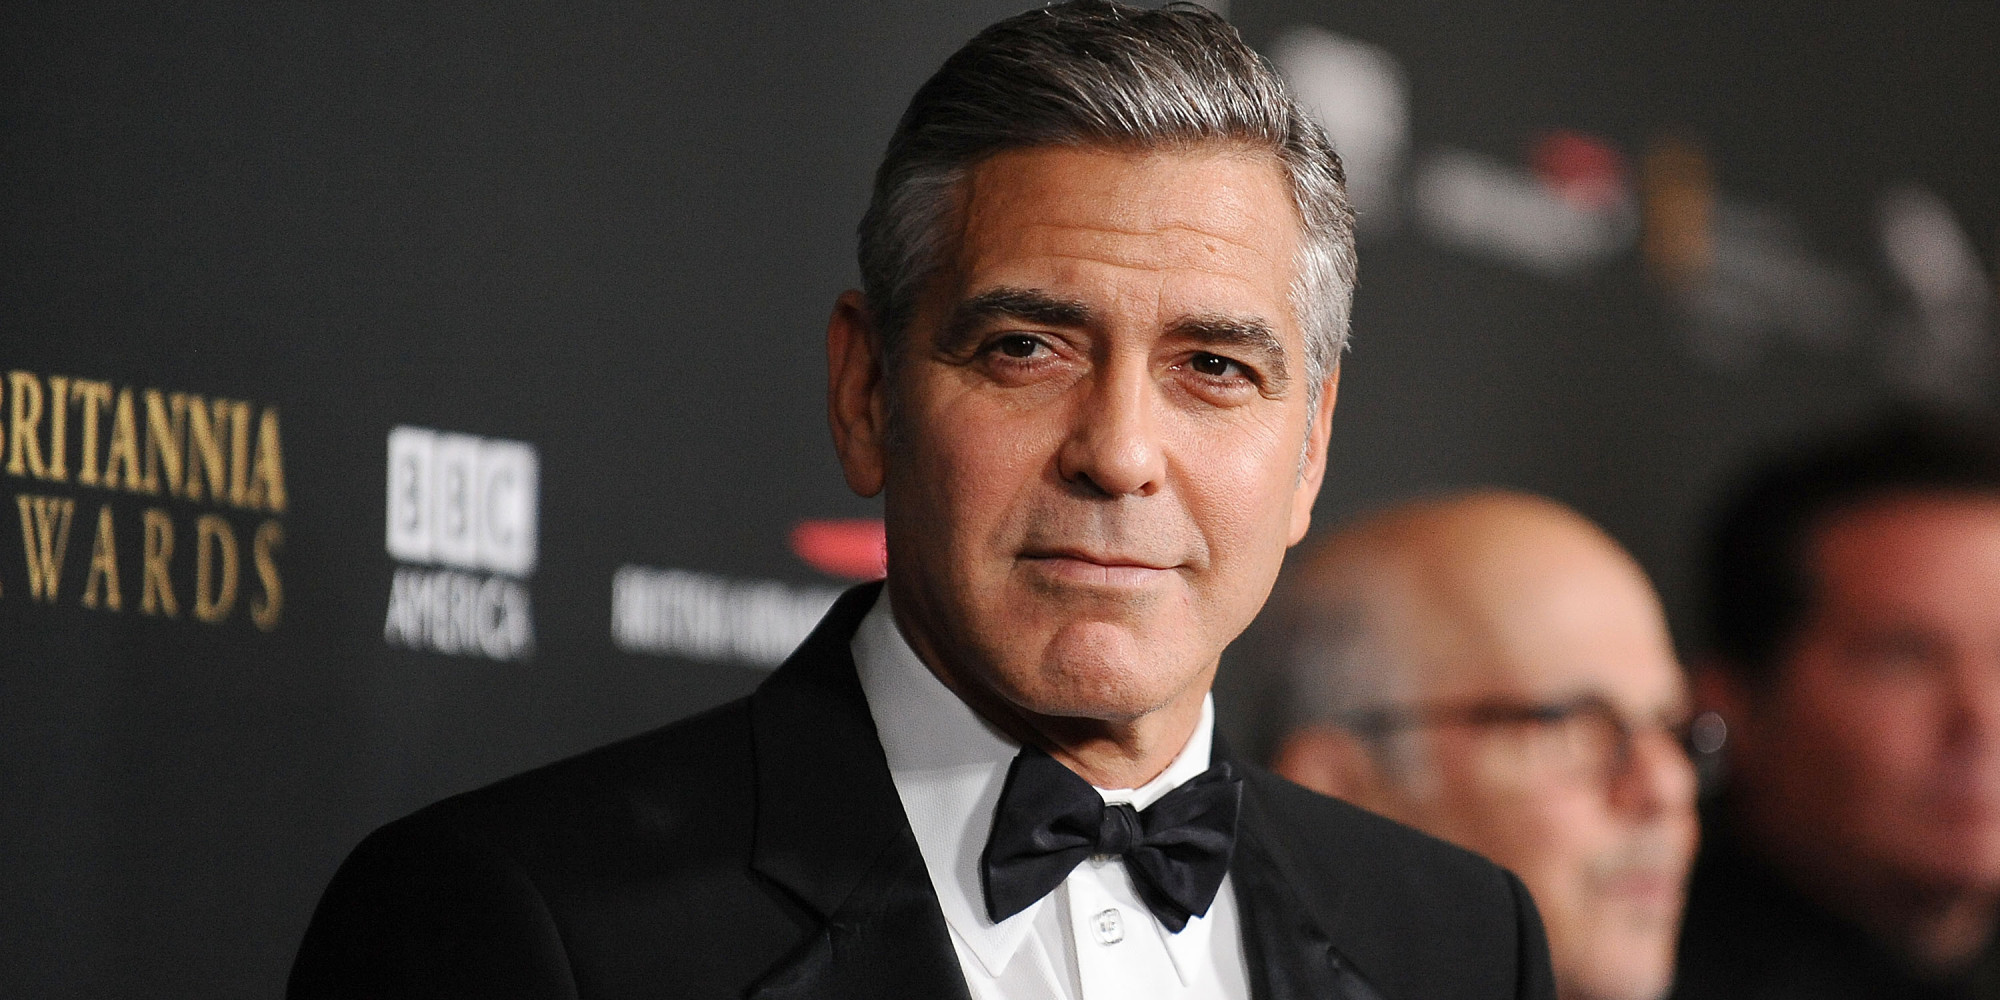 Awesome George Clooney Background Wallpaper